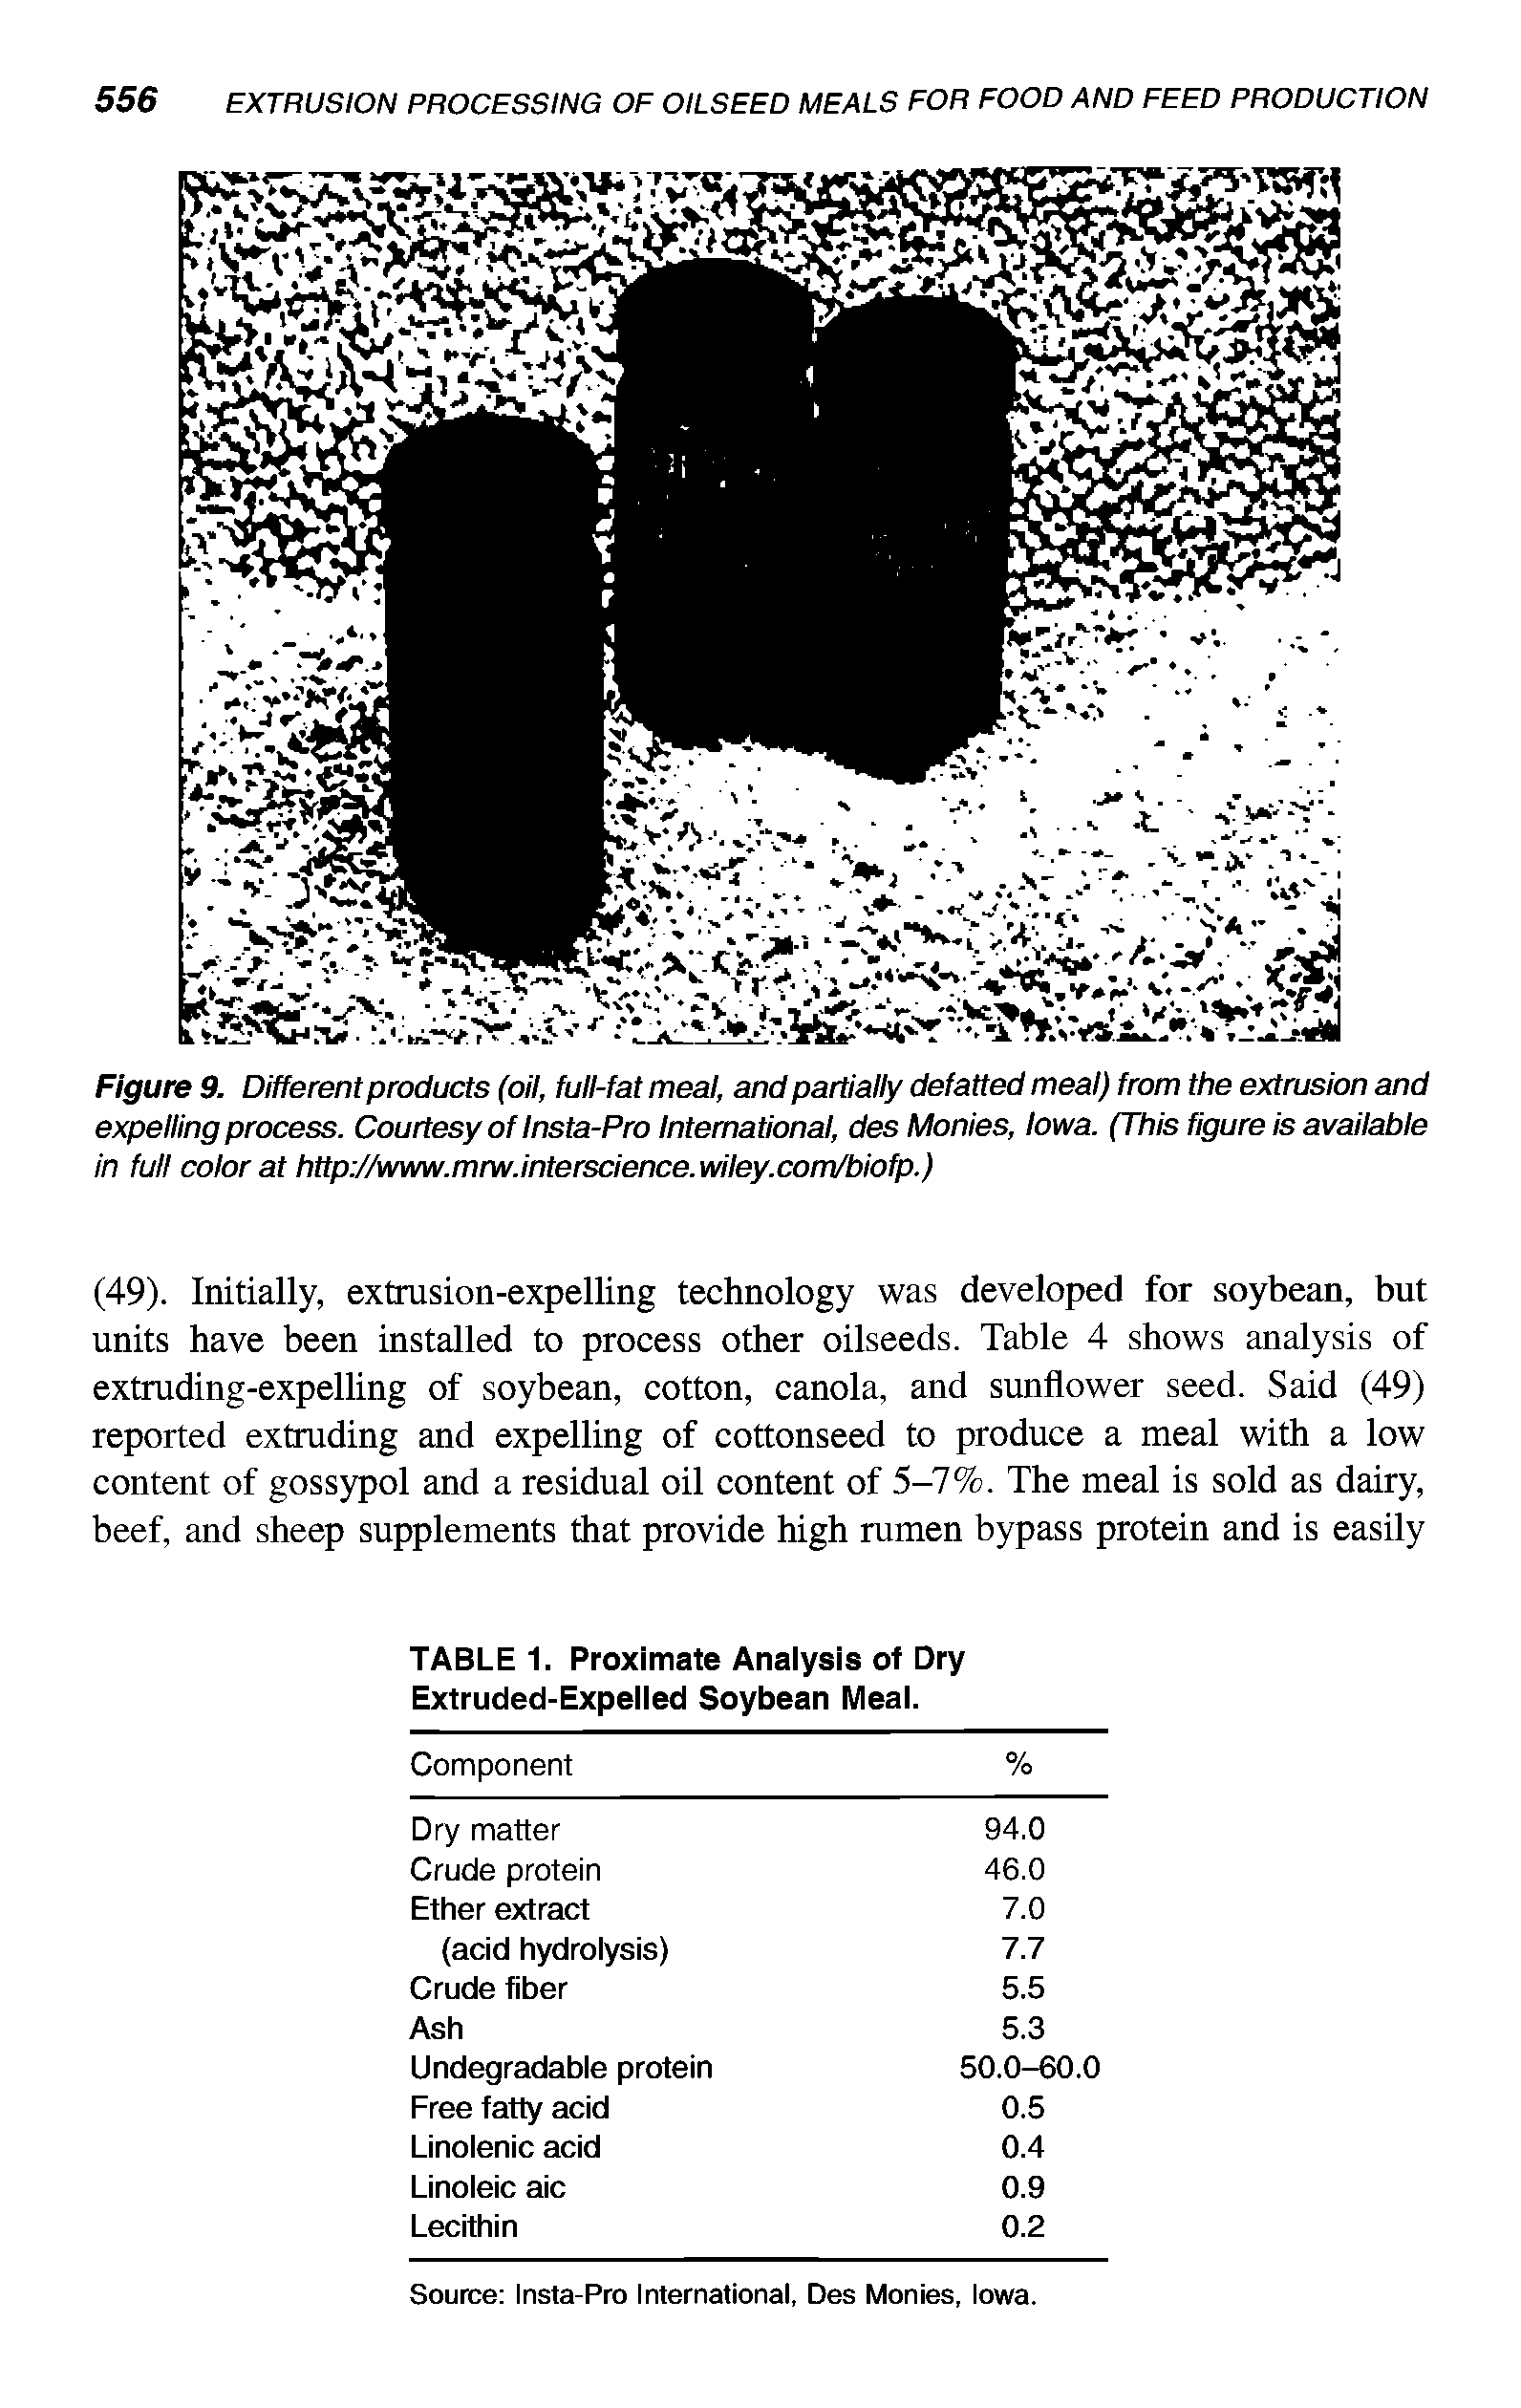 Figure 9. Different products (oil, full-fat meal, and partially defatted meal) from the extrusion and expelling process. Courtesy of Insta-Pro International, des Monies, Iowa. (This figure is available in full color at http //www.mrw.interscience.wiley.com/biofp.)...